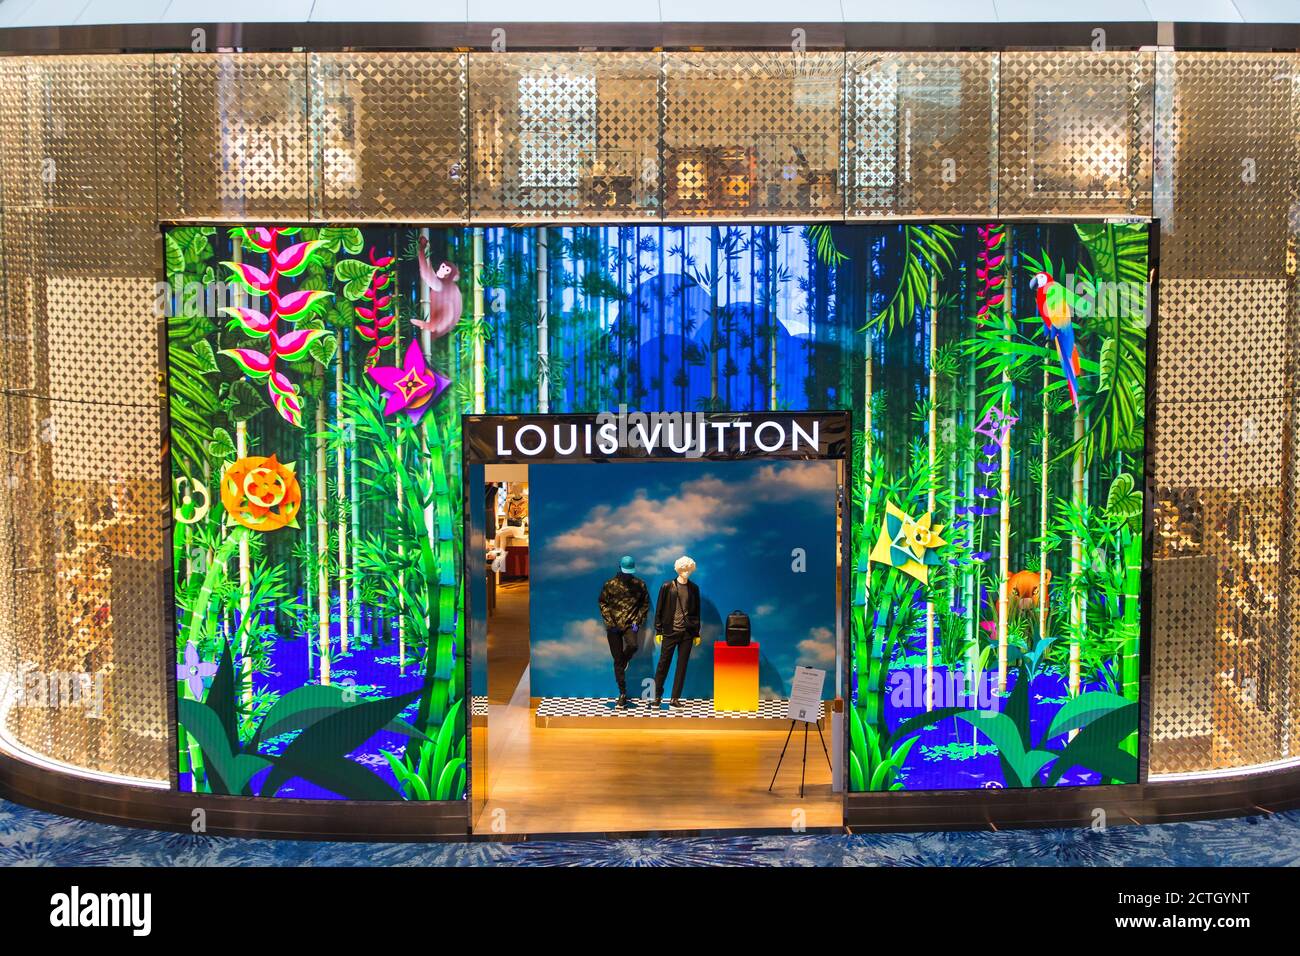 World's First Louis Vuitton Airport Store Opens In Seoul